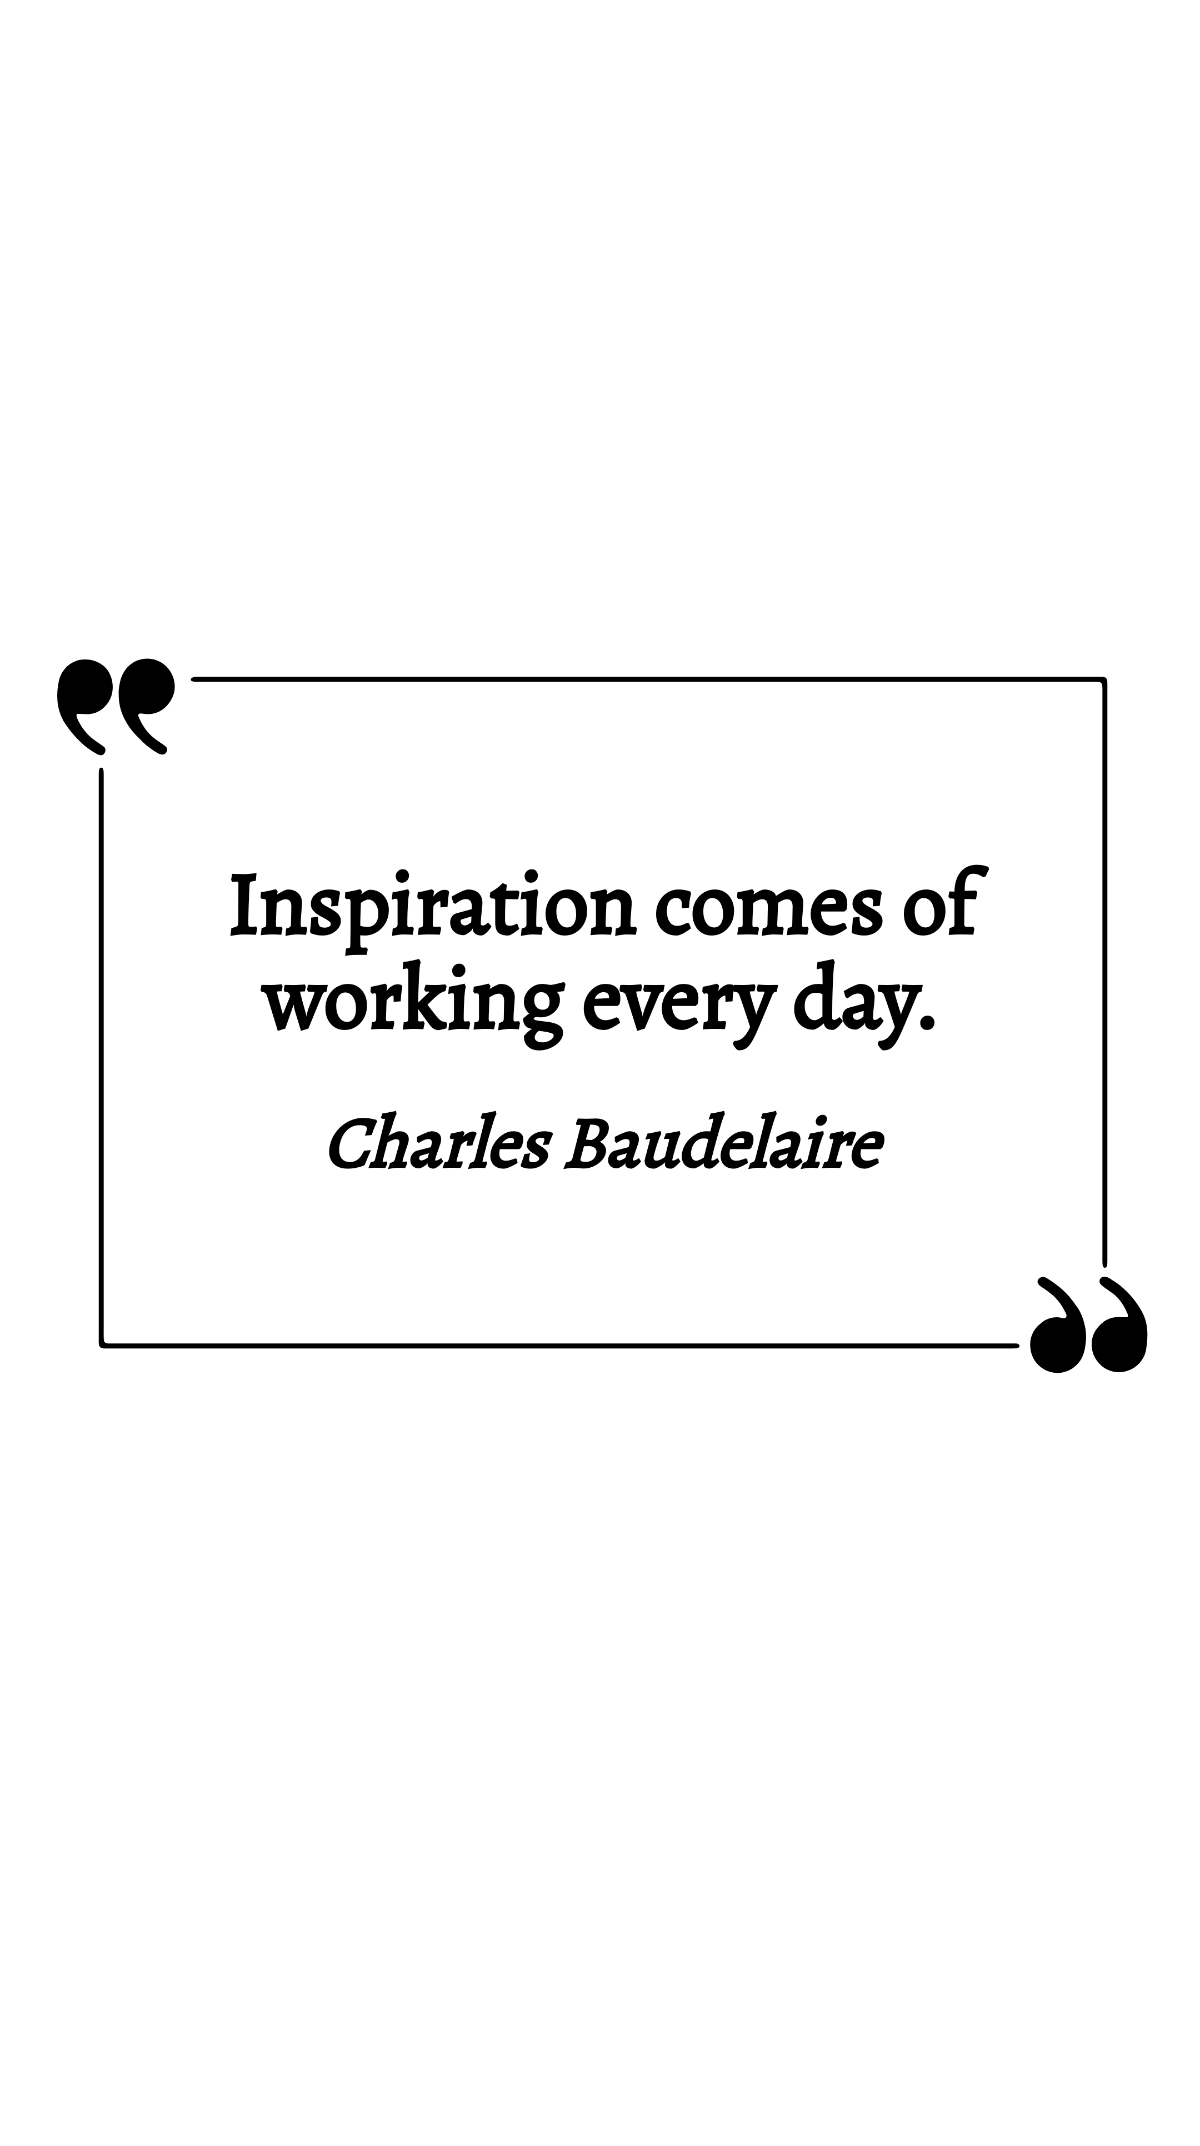 Free Charles Baudelaire - Inspiration comes of working every day. Template